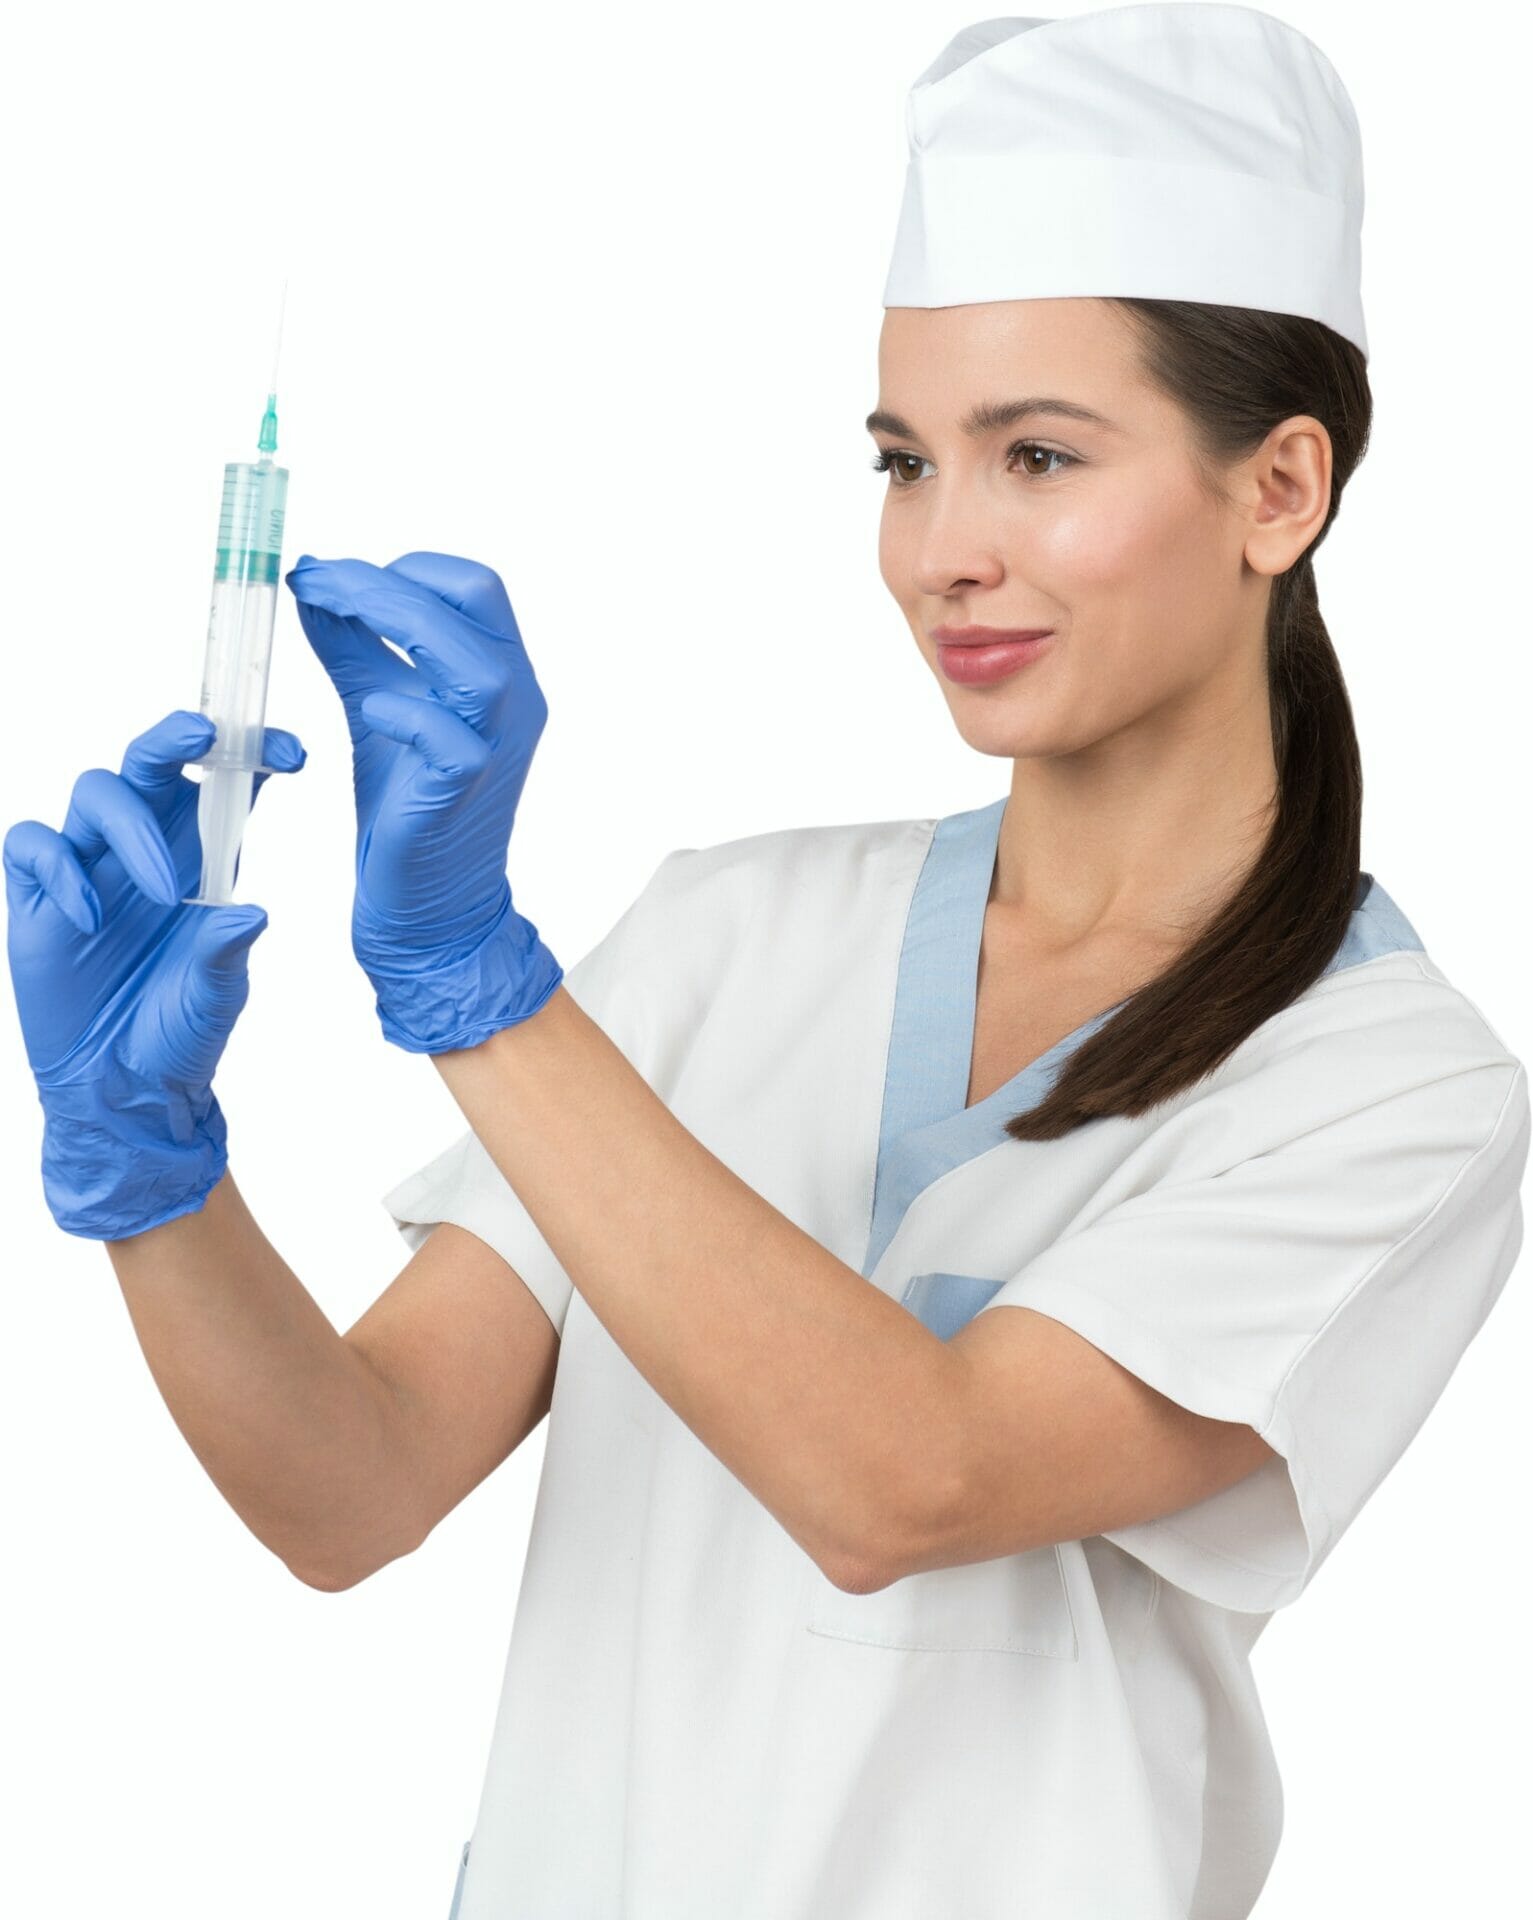 a nurse holding a syringe in her hand